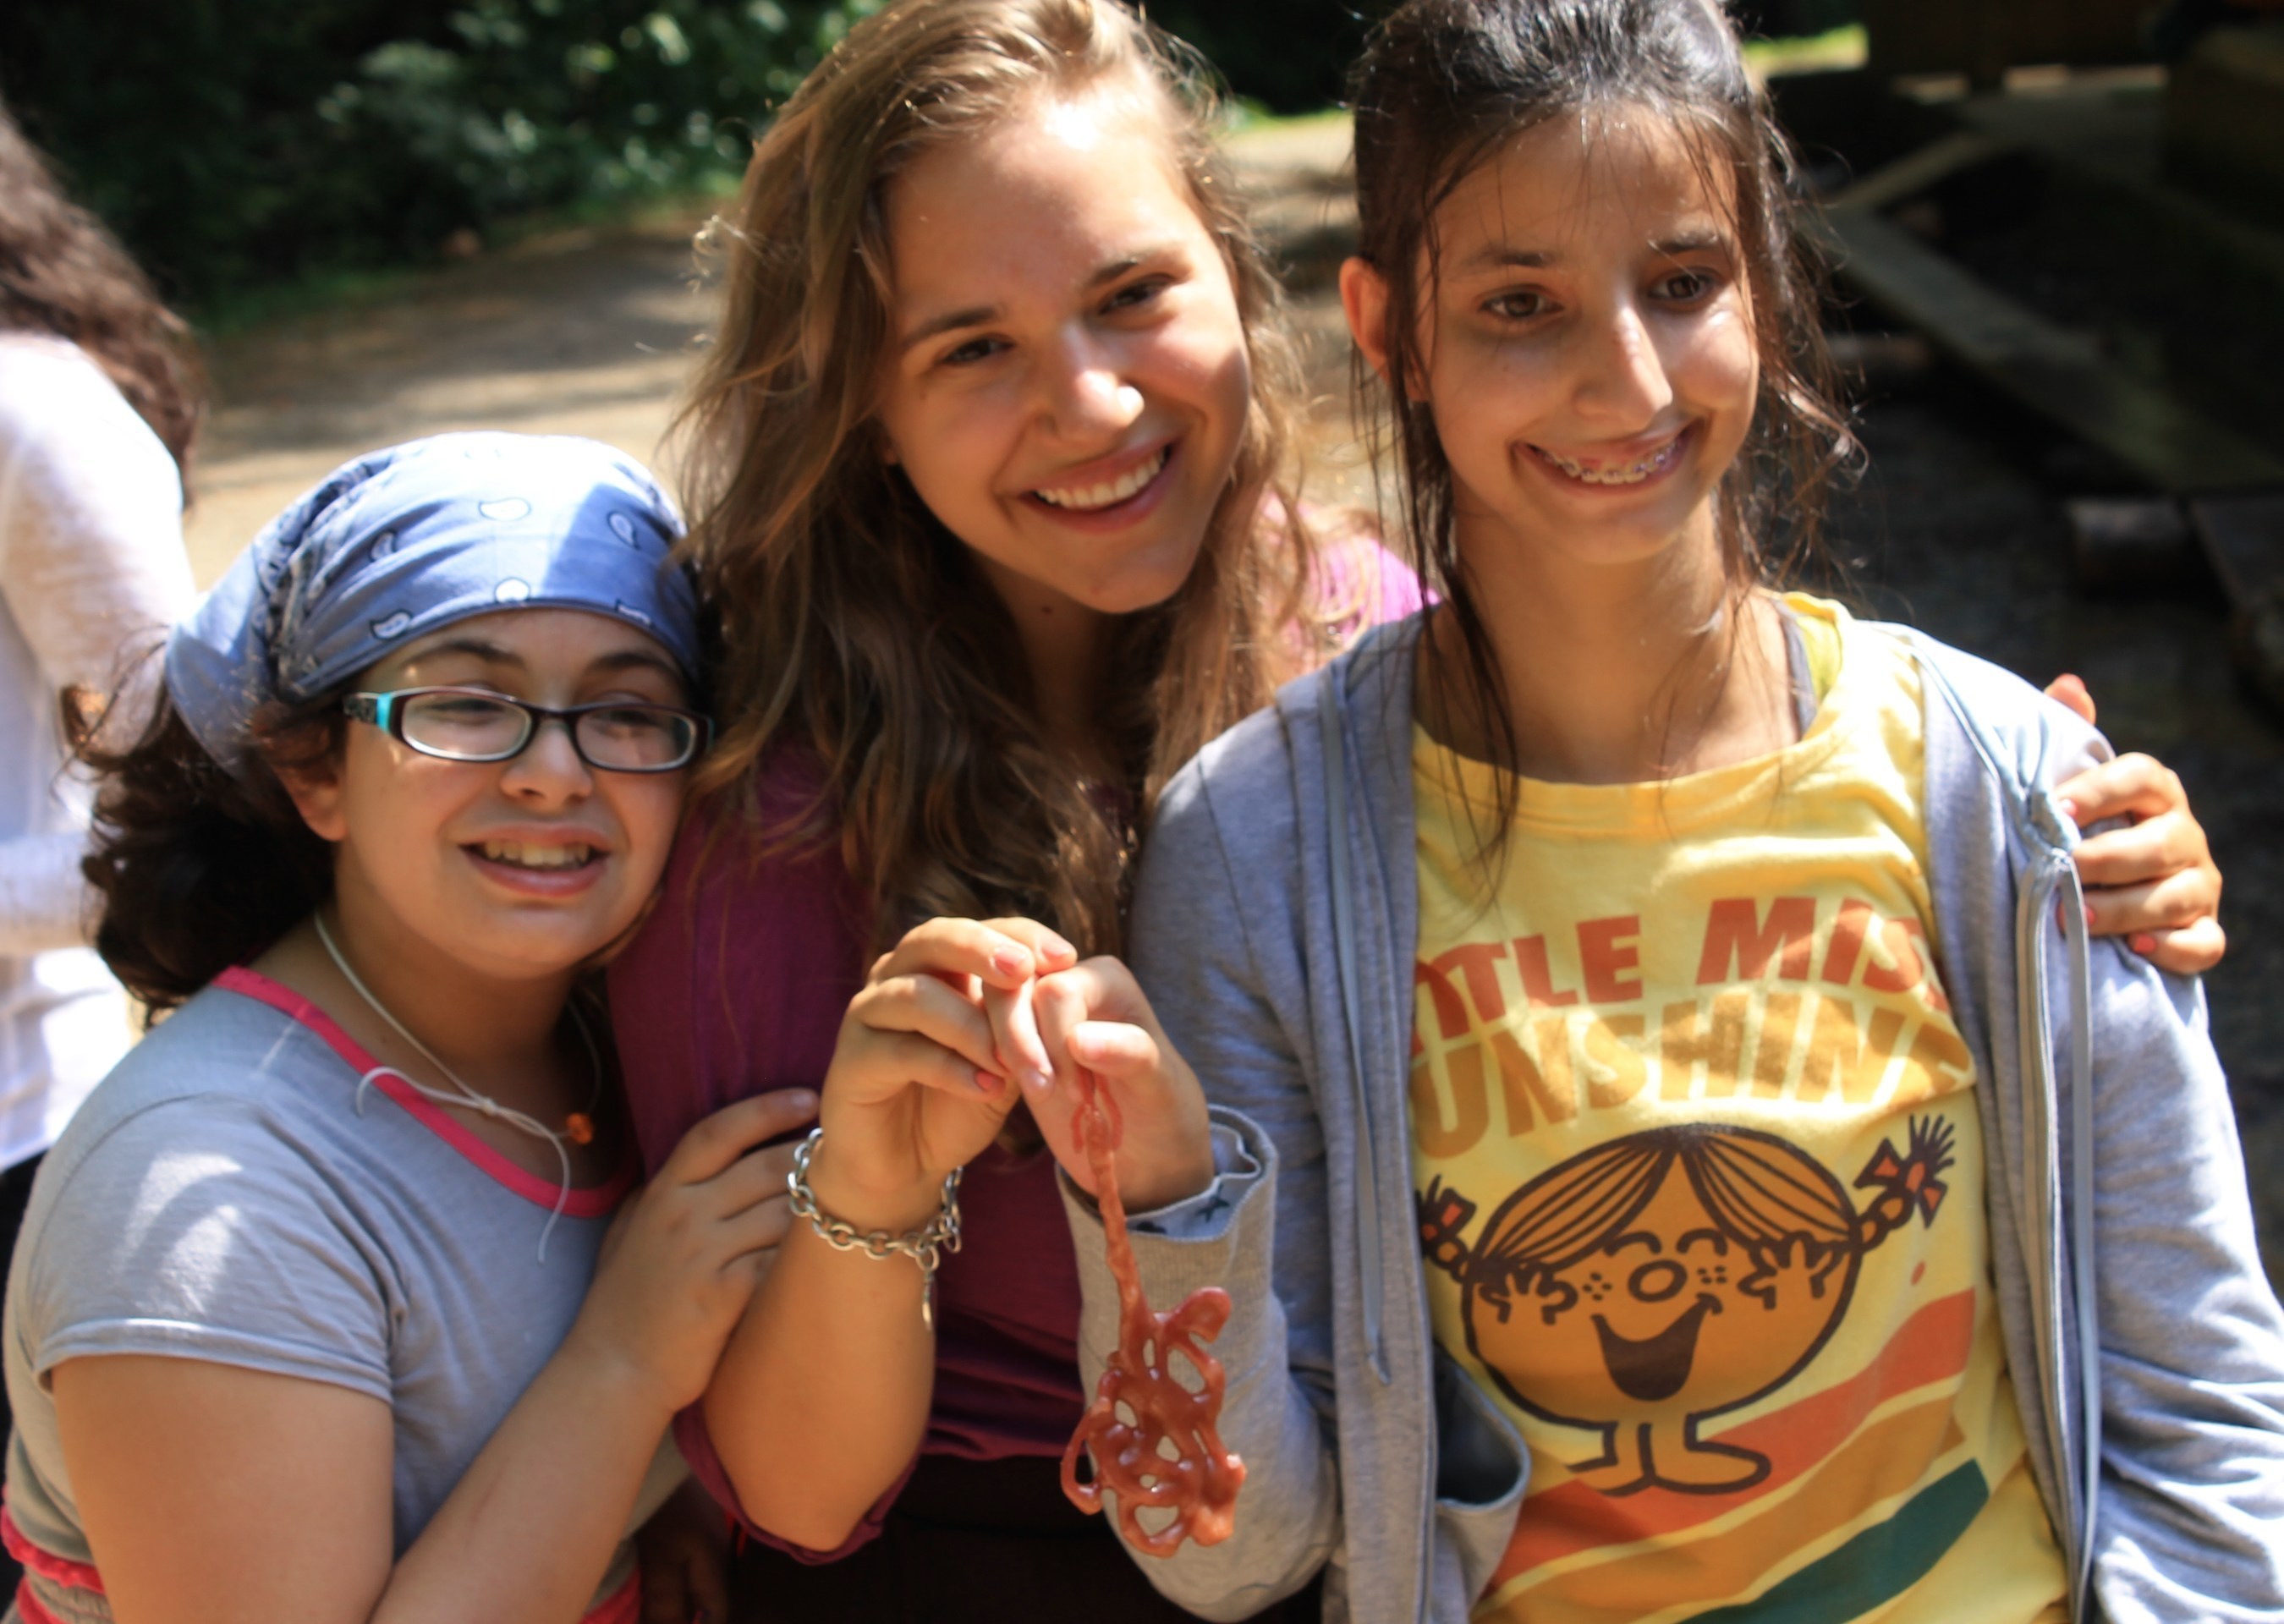 Camp Living Wonders: where every child has the ABILITY to shine.